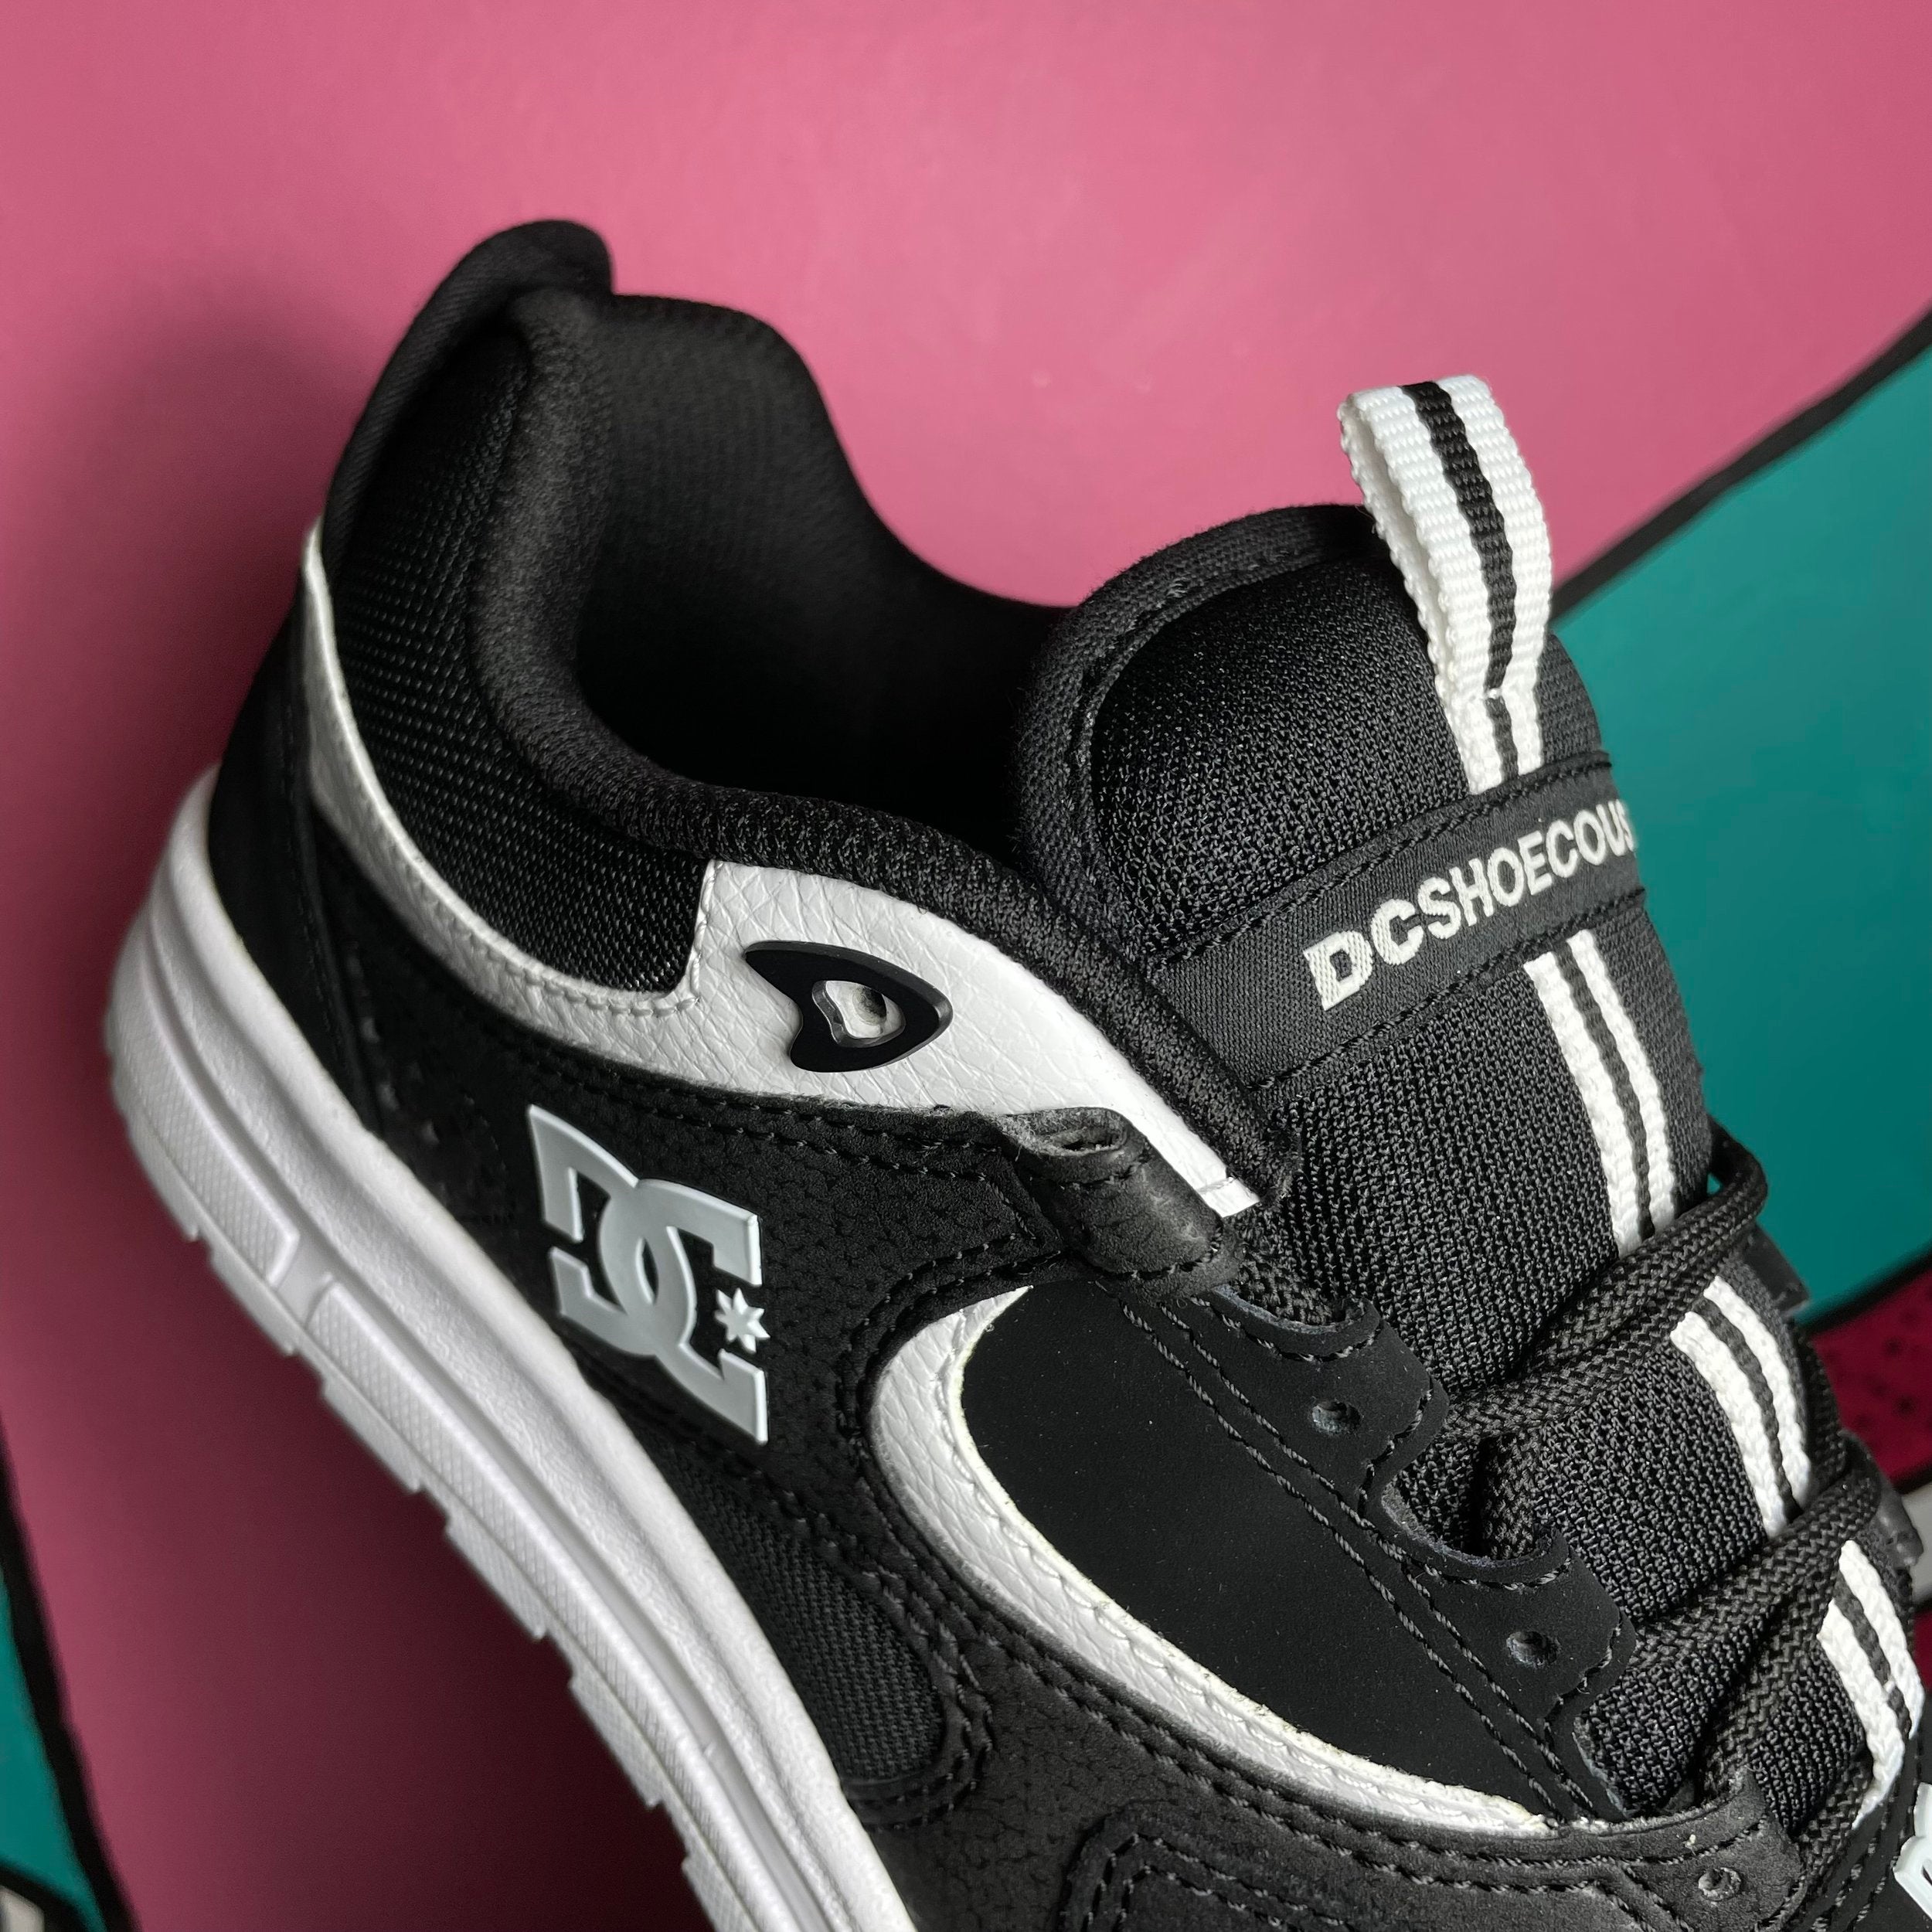 Top more than 258 dc shoes black sneakers latest